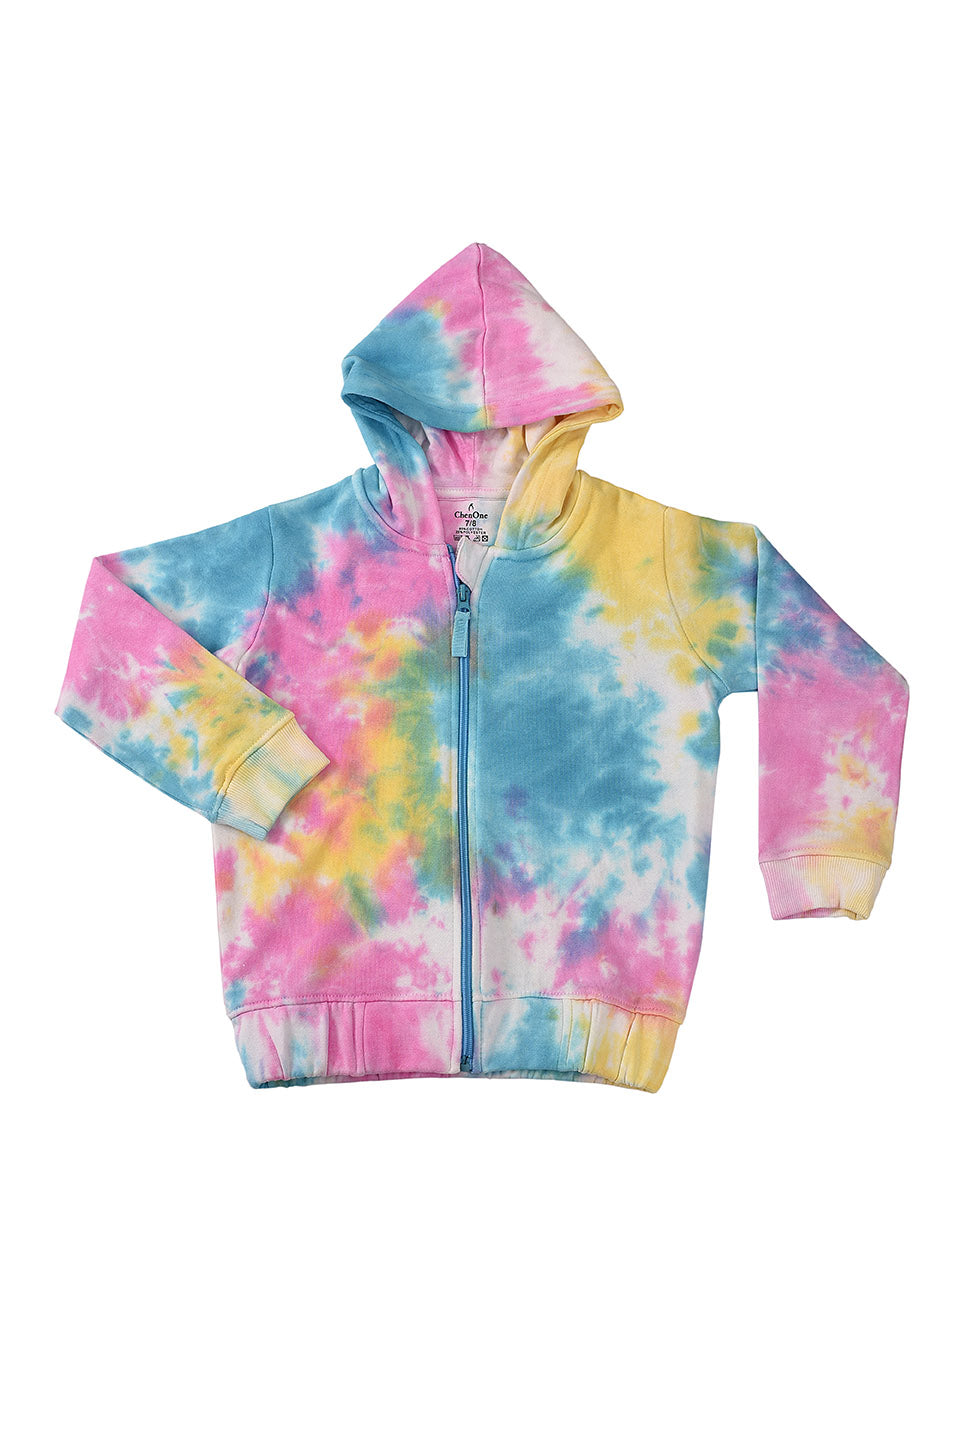 KDS-GC-12622 HOODED PULL OVER BLUE TIE&DYE